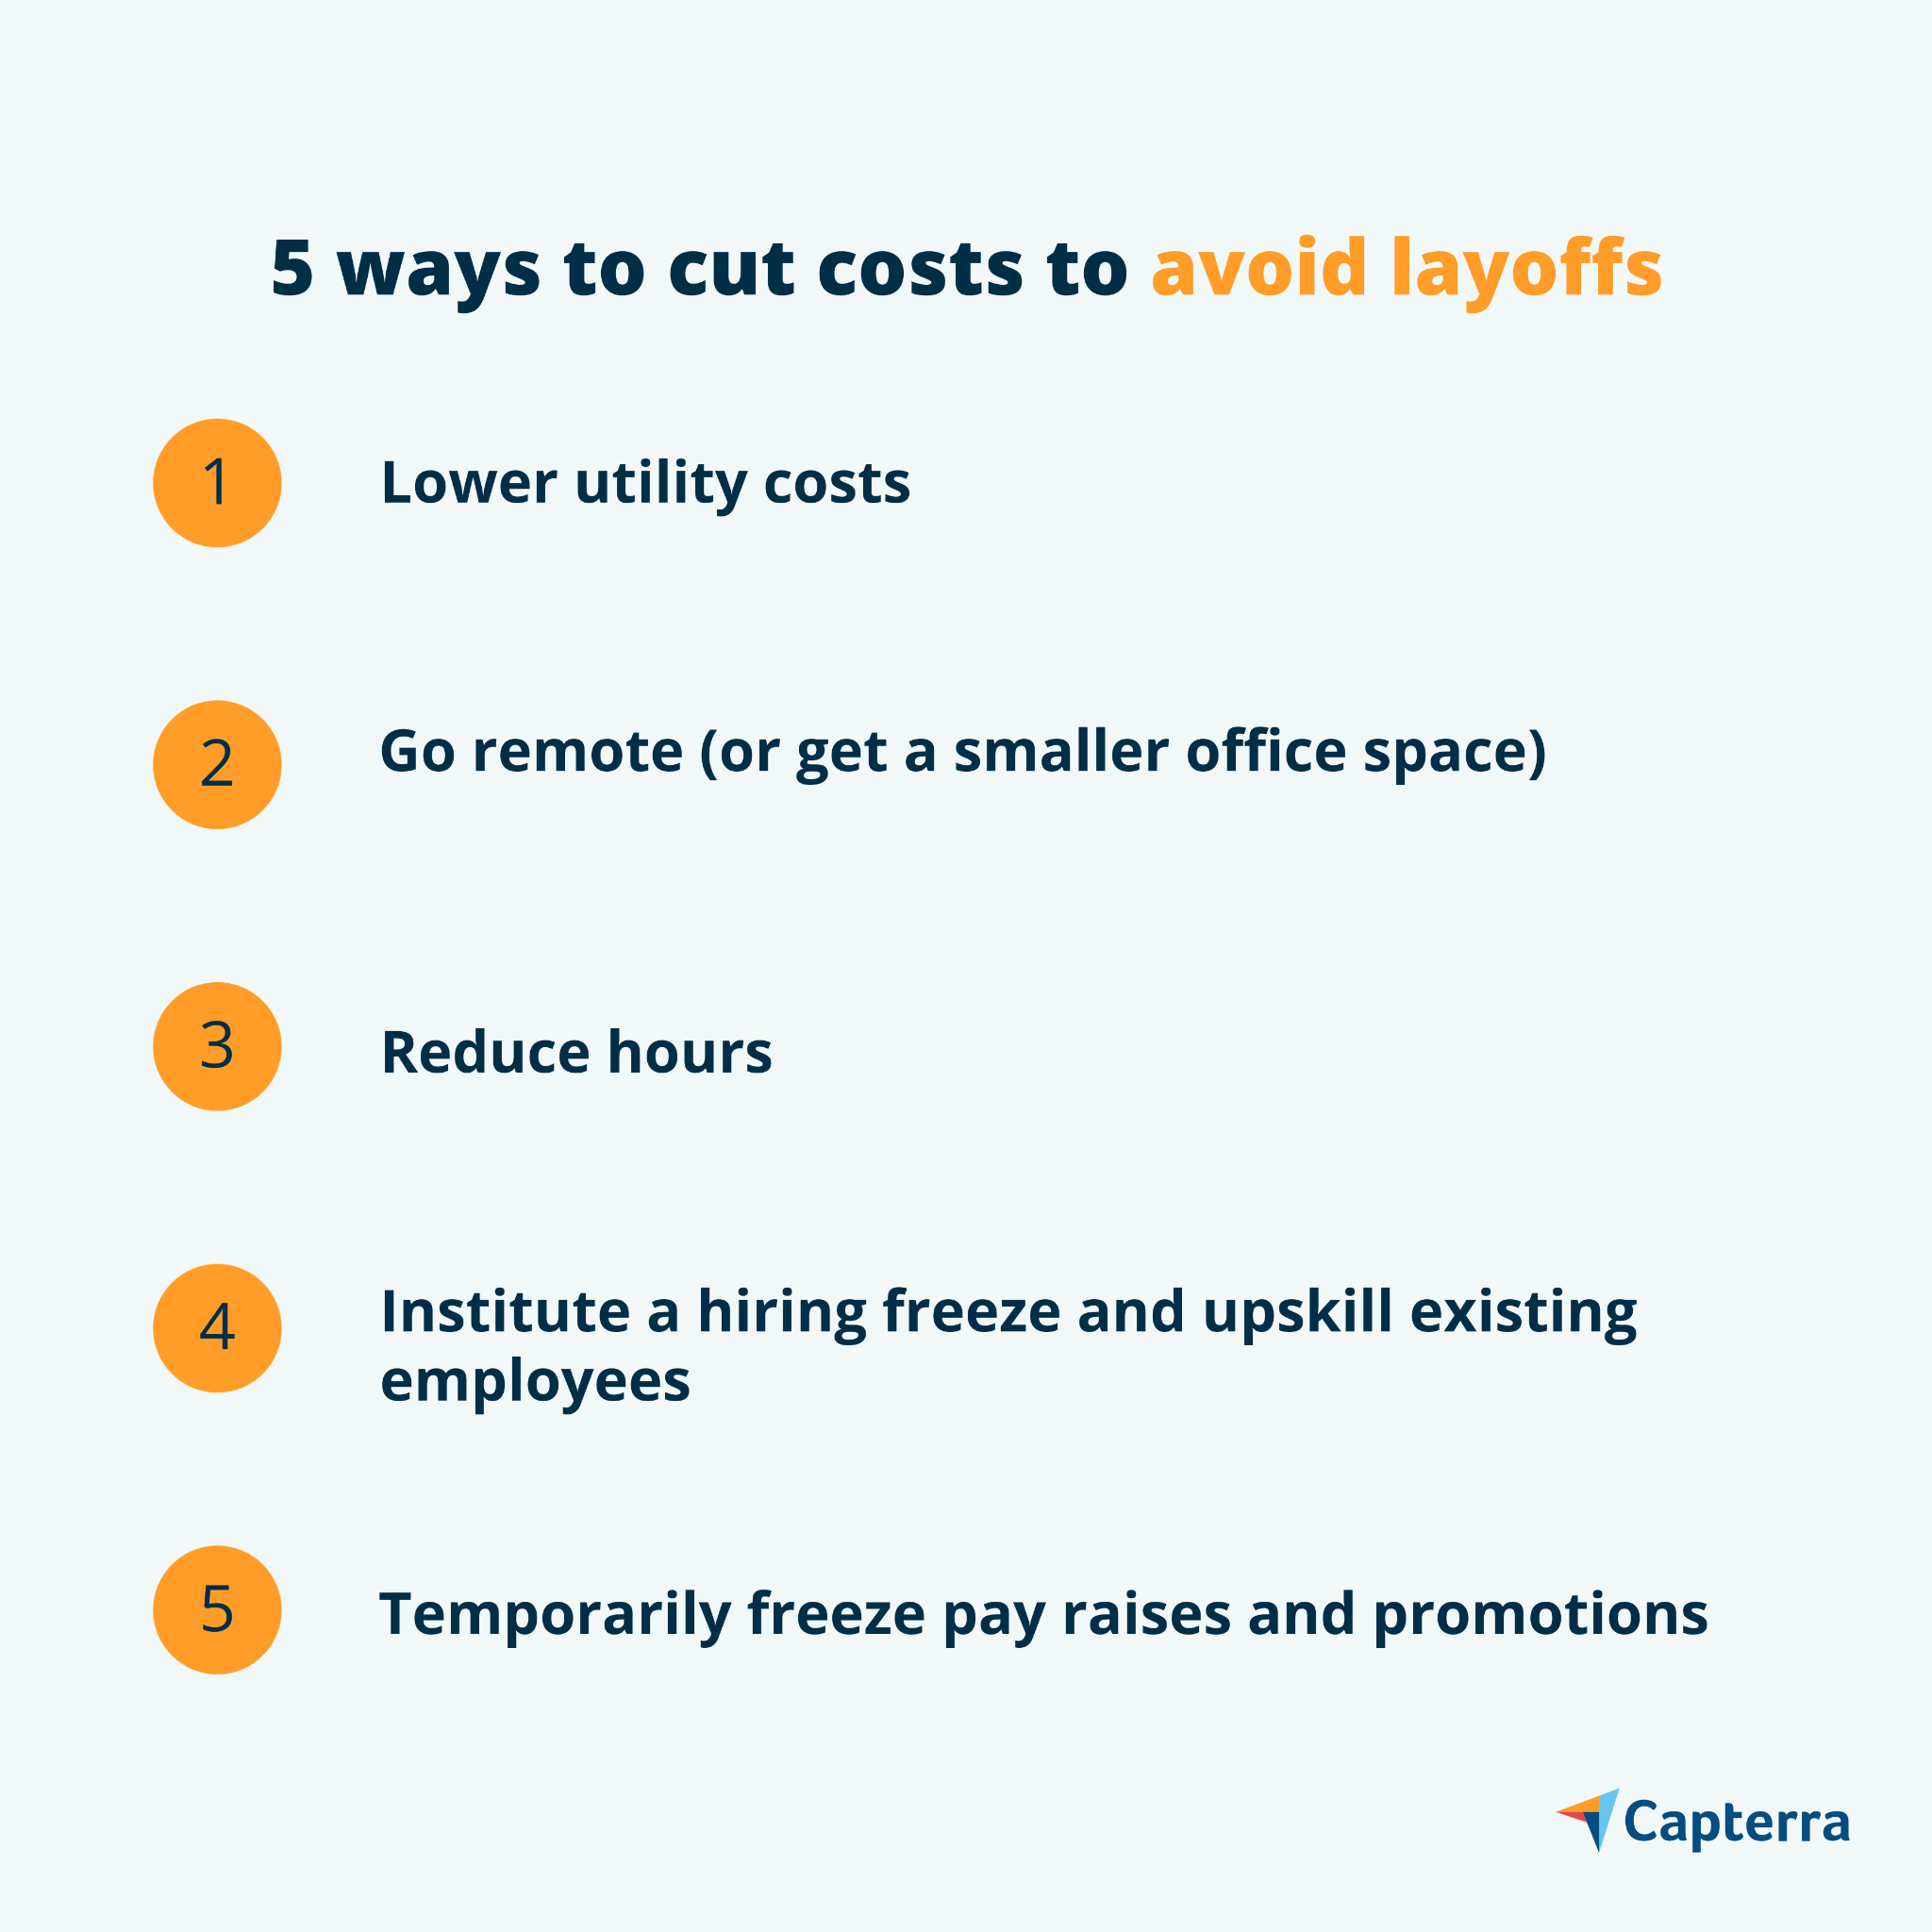 https://images.ctfassets.net/wt70guc1rpin/wp-media-78911/bbc94350db5ed54c83bfff87557ee9df/5-ways-to-cut-costs-to-avoid-layoffs.png